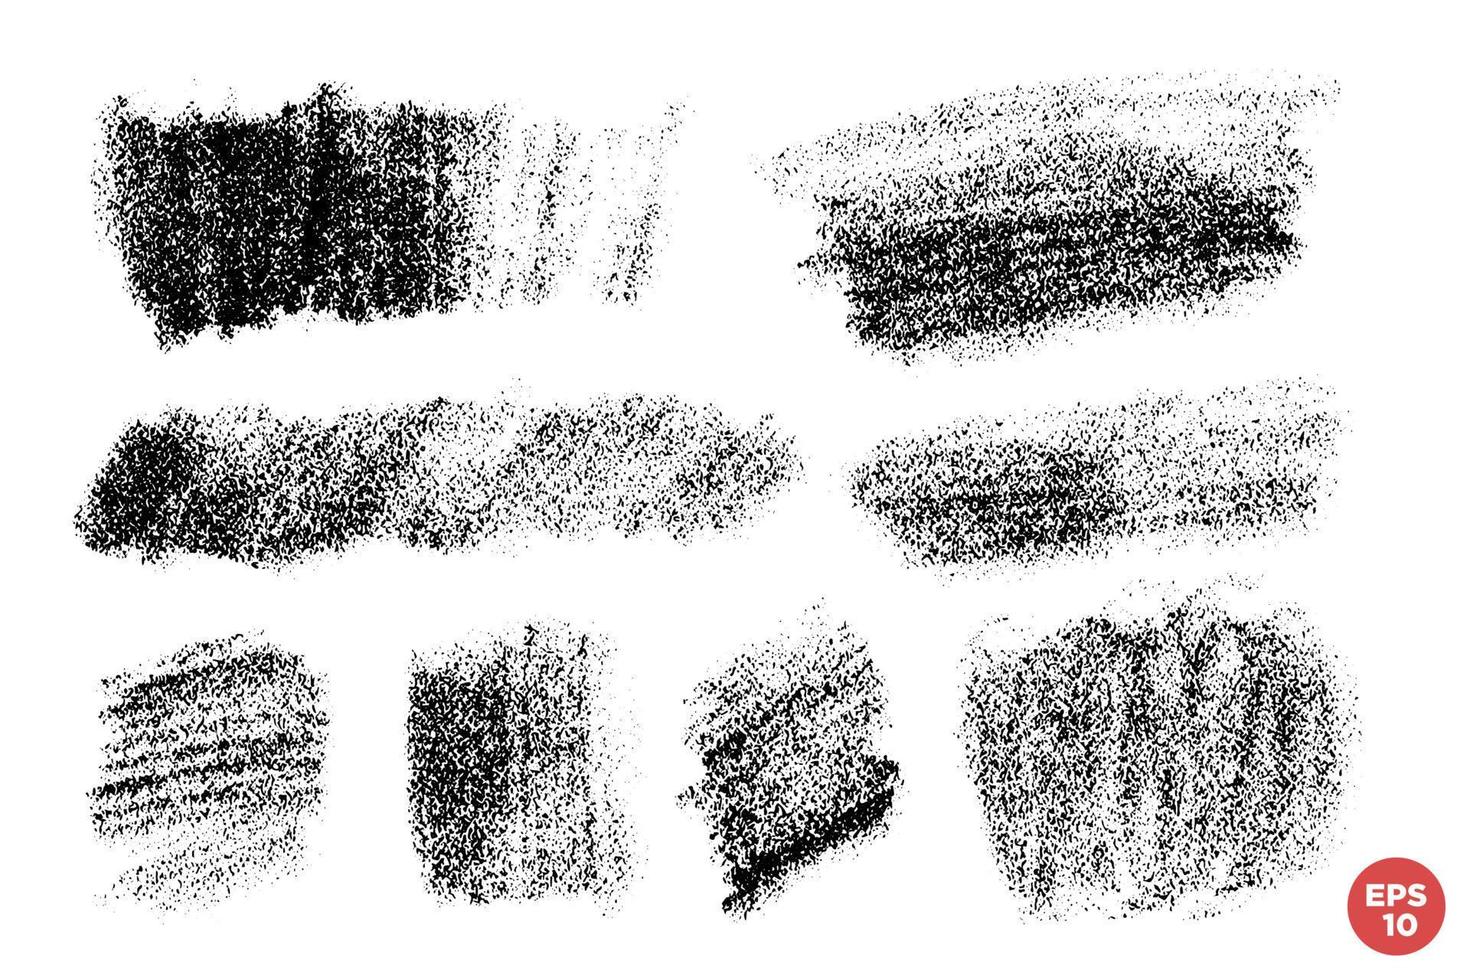 Vector hand drawn pencil like stains various shapes. Monochrome design element. One color monochrome artistic hand drawn backgrounds.